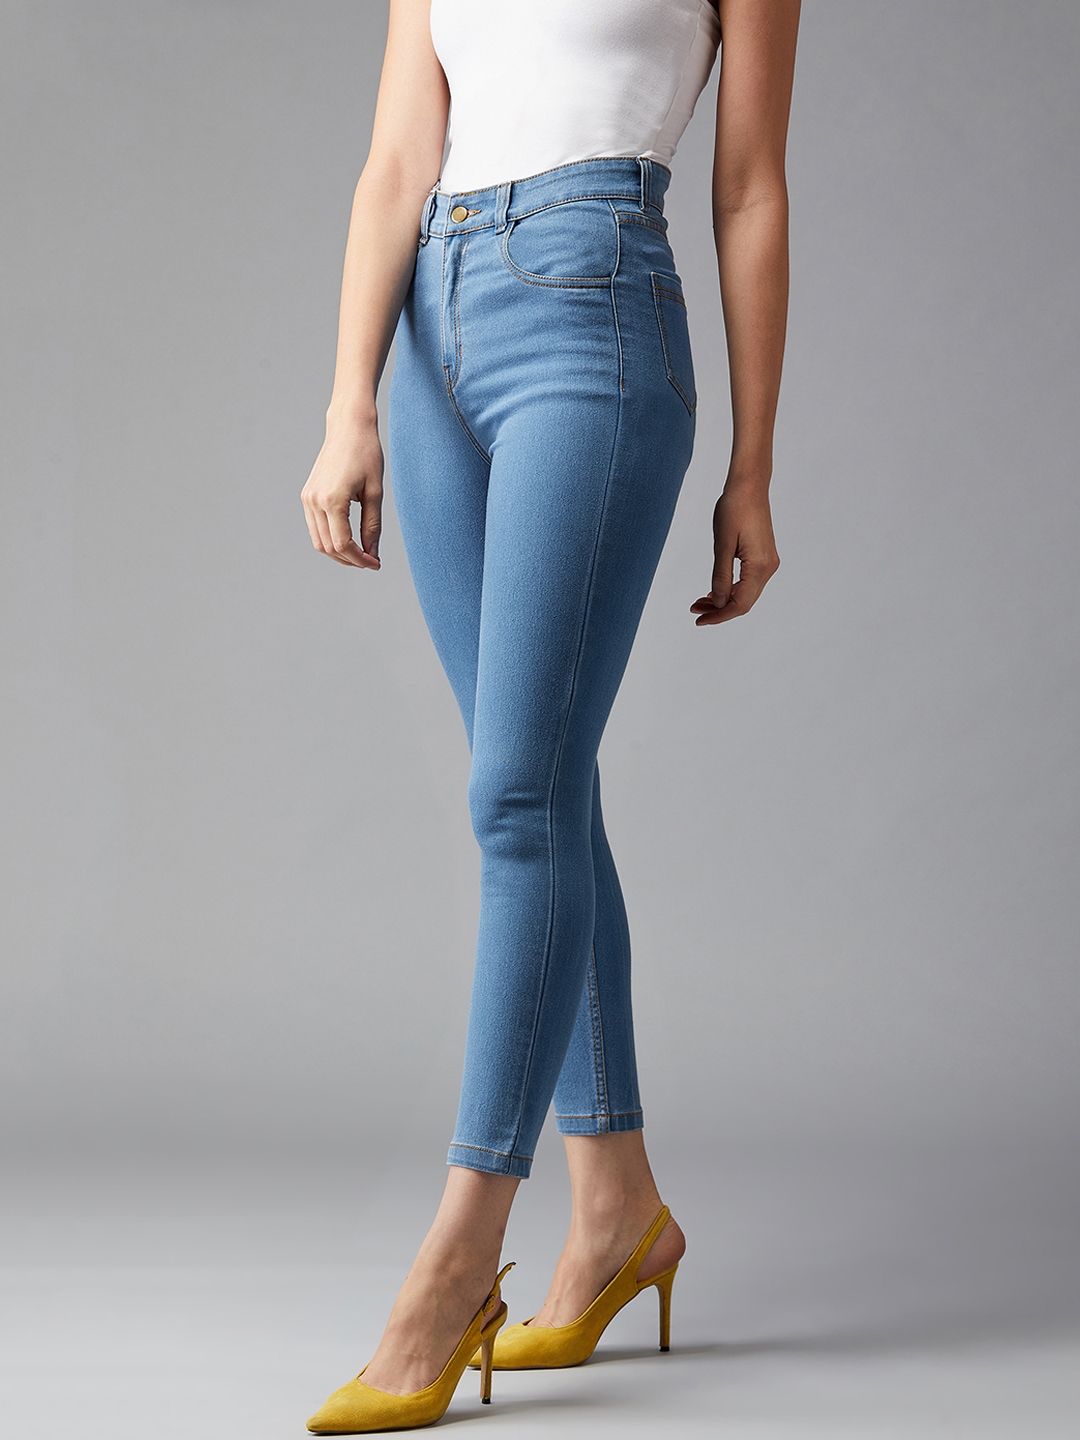 Buy DOLCE Women Blue Skinny Fit High Rise Clean Look Stretchable Jeans - Women | Myntra